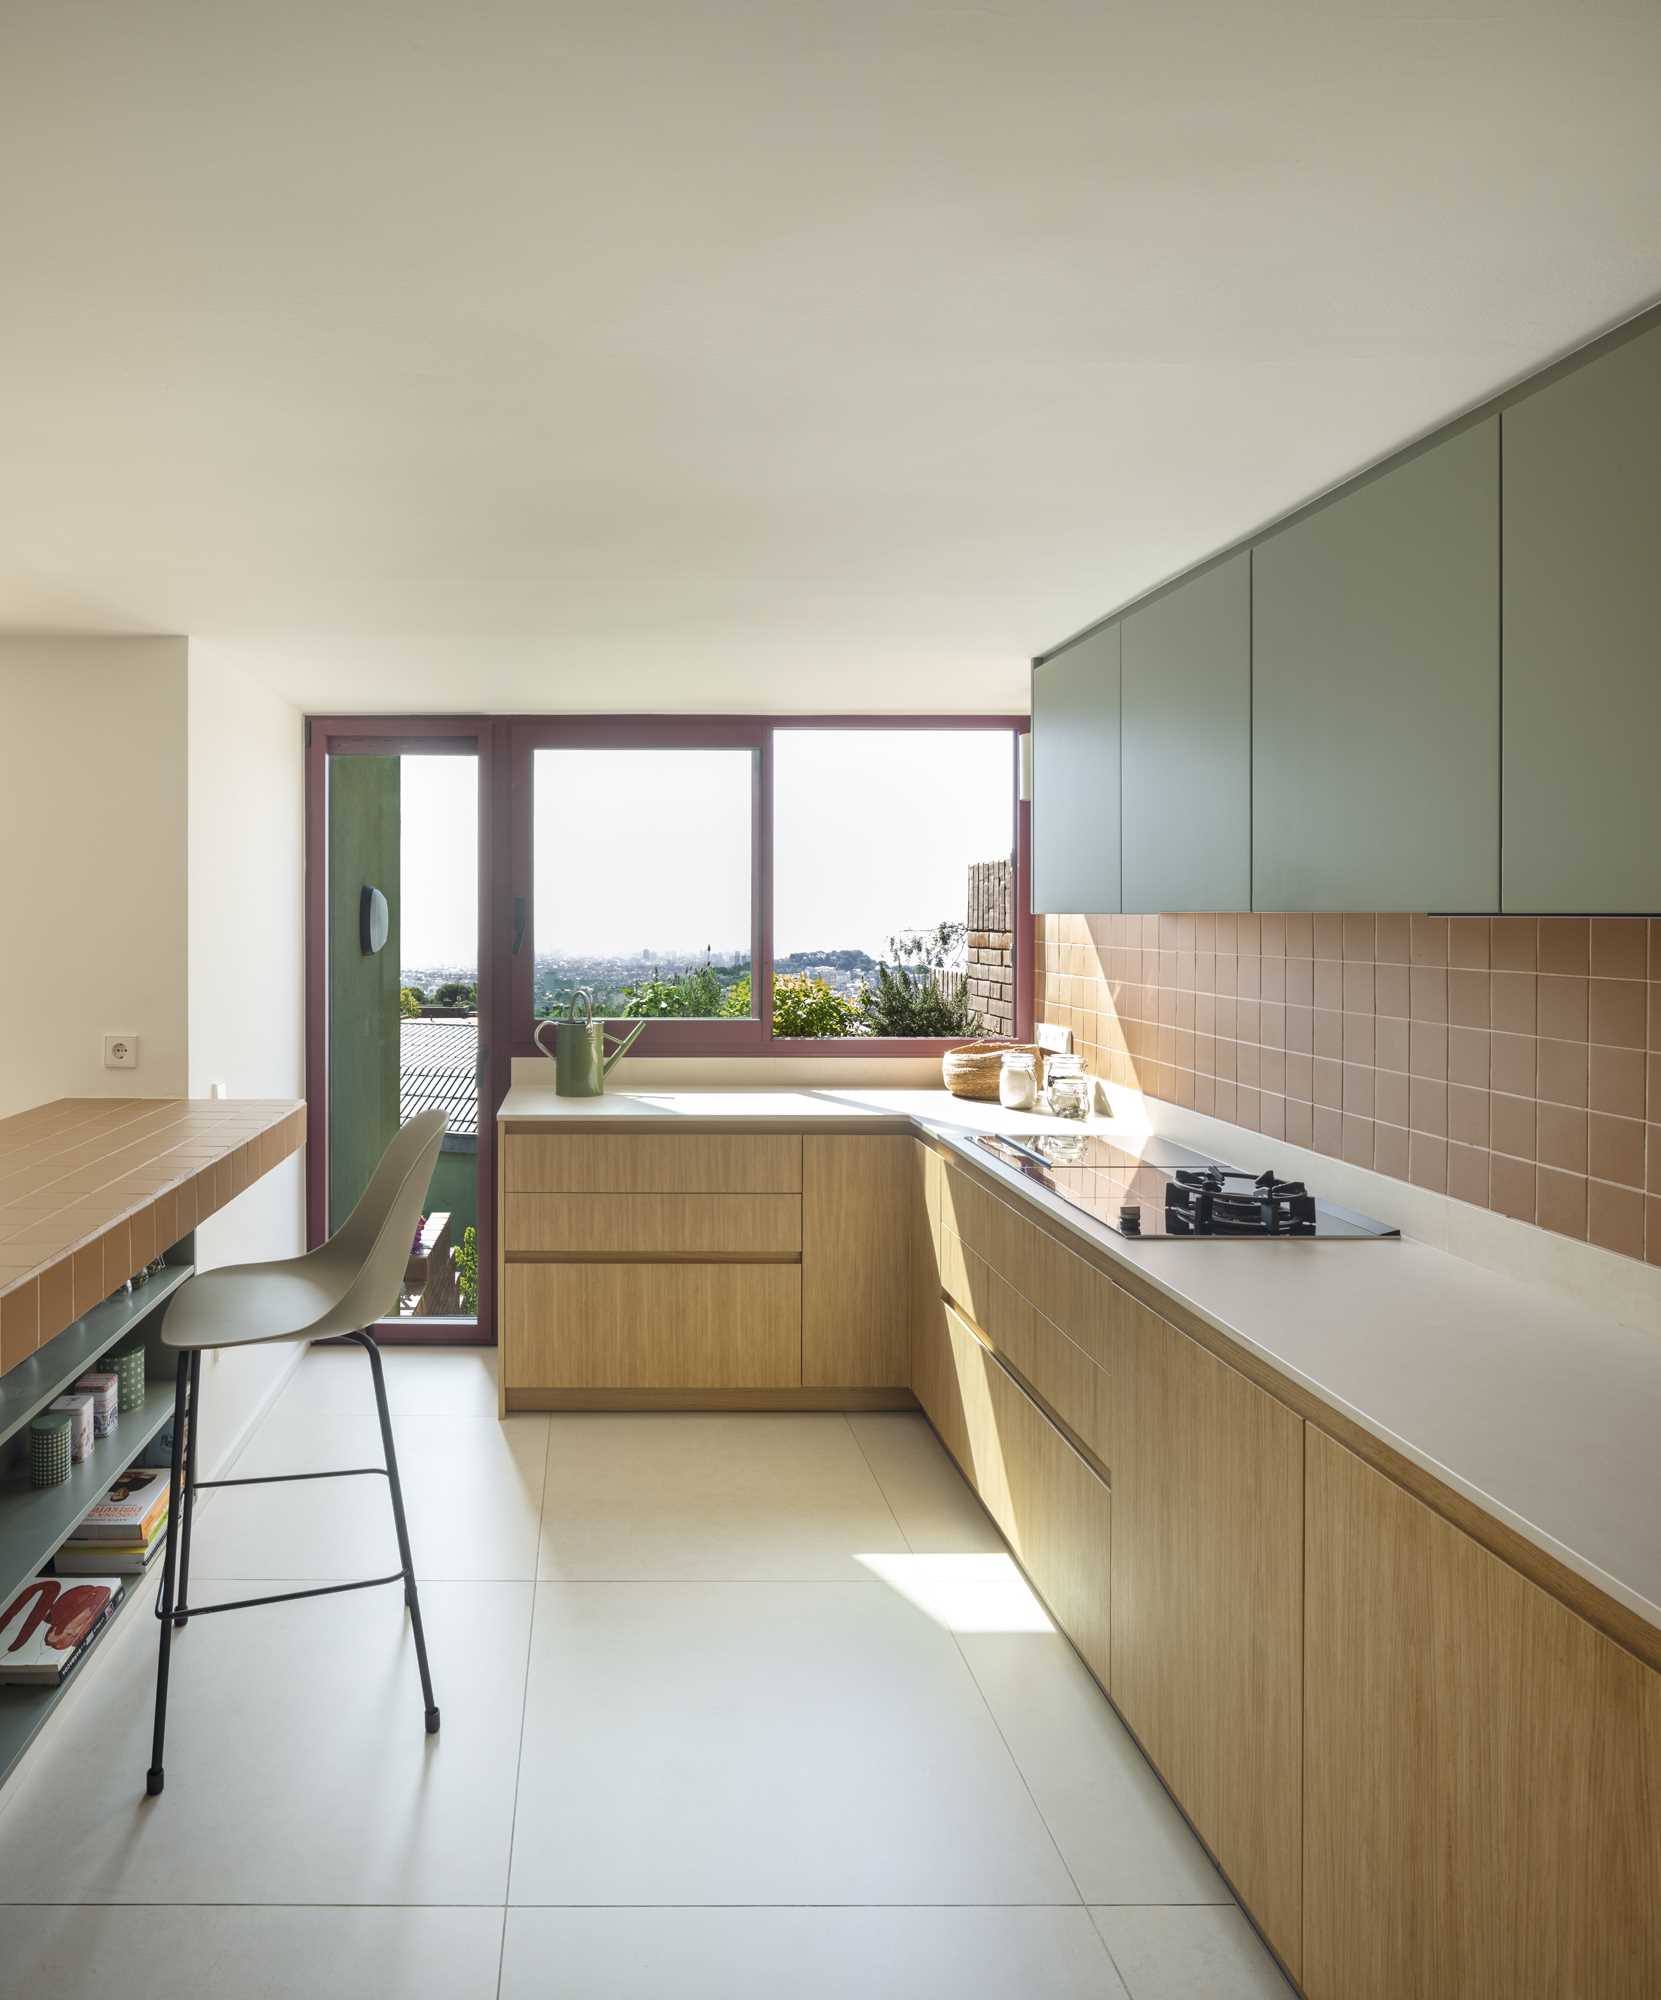 A contemporary kitchen with wood and sage green cabinets and terracotta colored tiles.